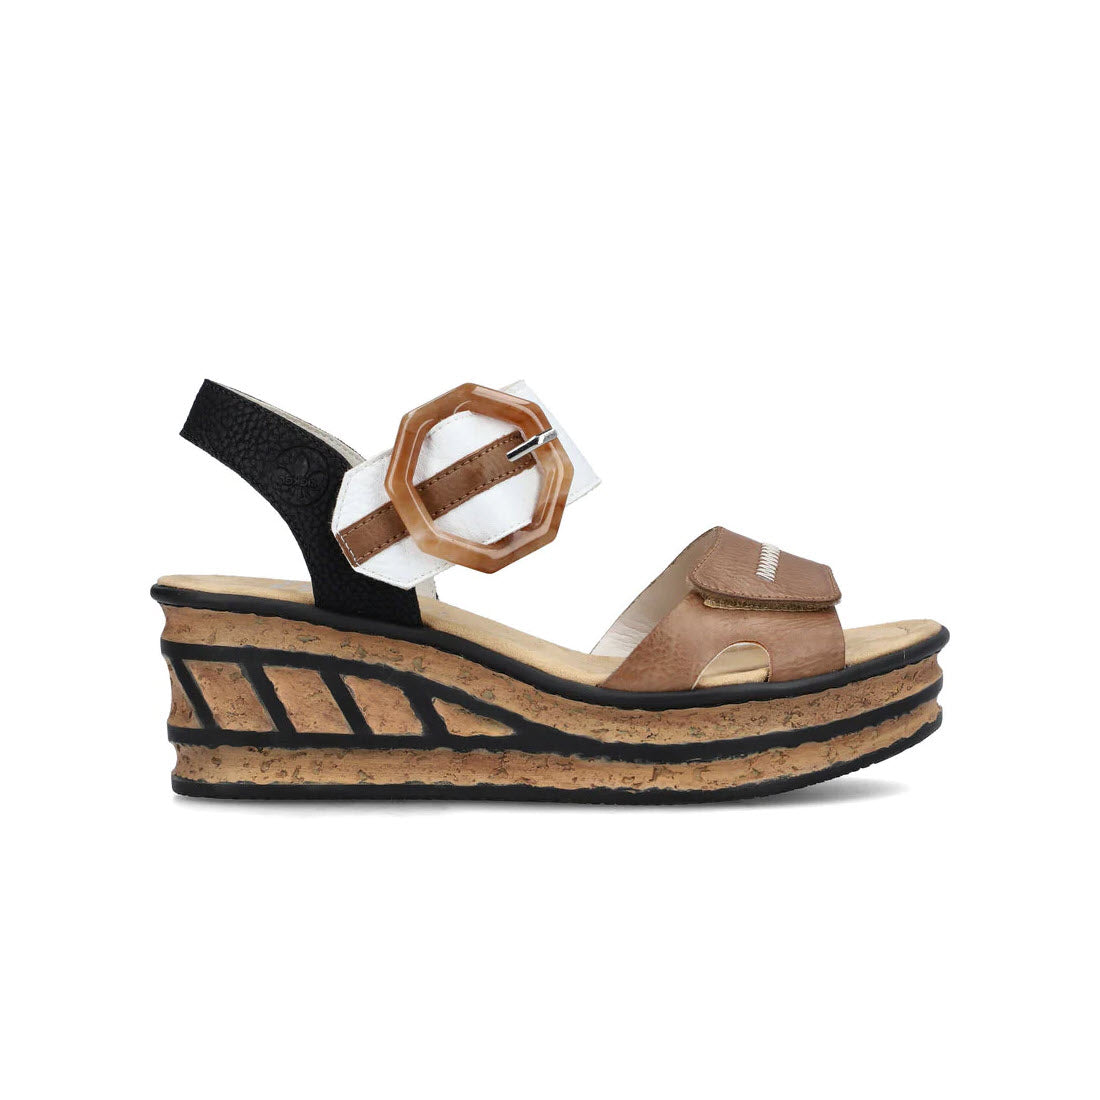 Side view of a Rieker women&#39;s wedge sandal with black and tan synthetic leather uppers, a large buckle, and a layered wooden sole.